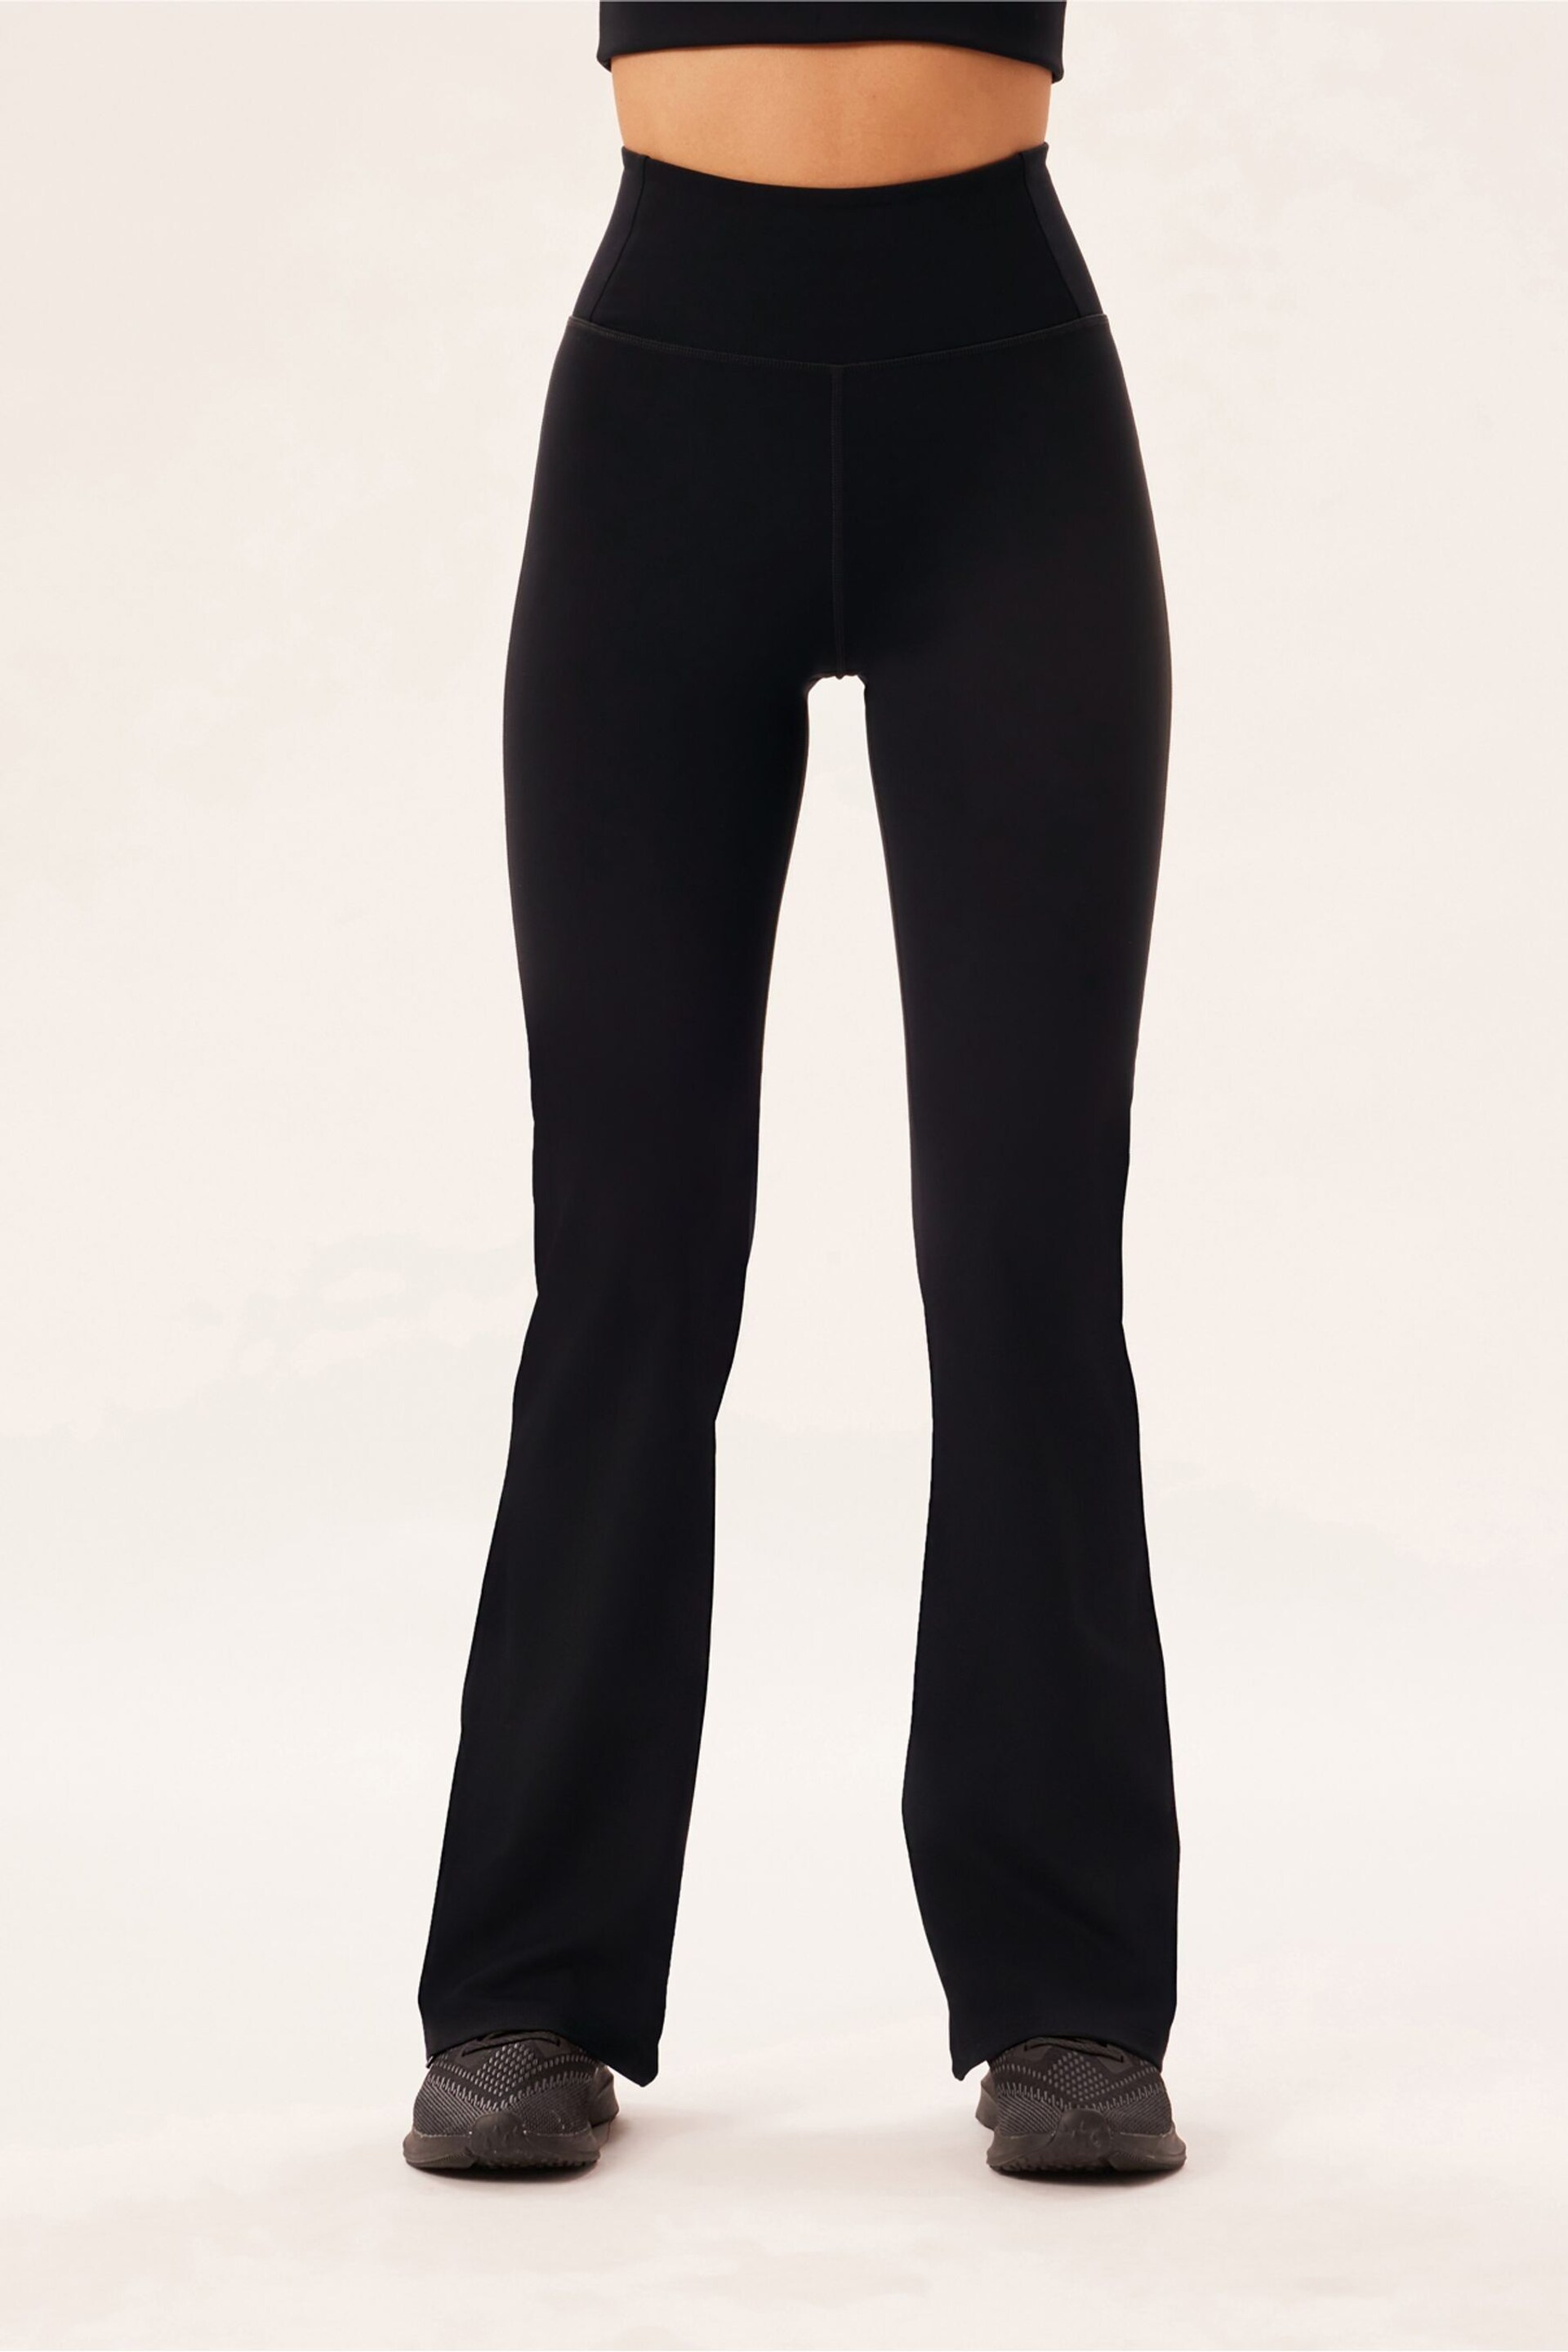 Girlfriend Collective Flare Black Leggings - Image 2 of 6